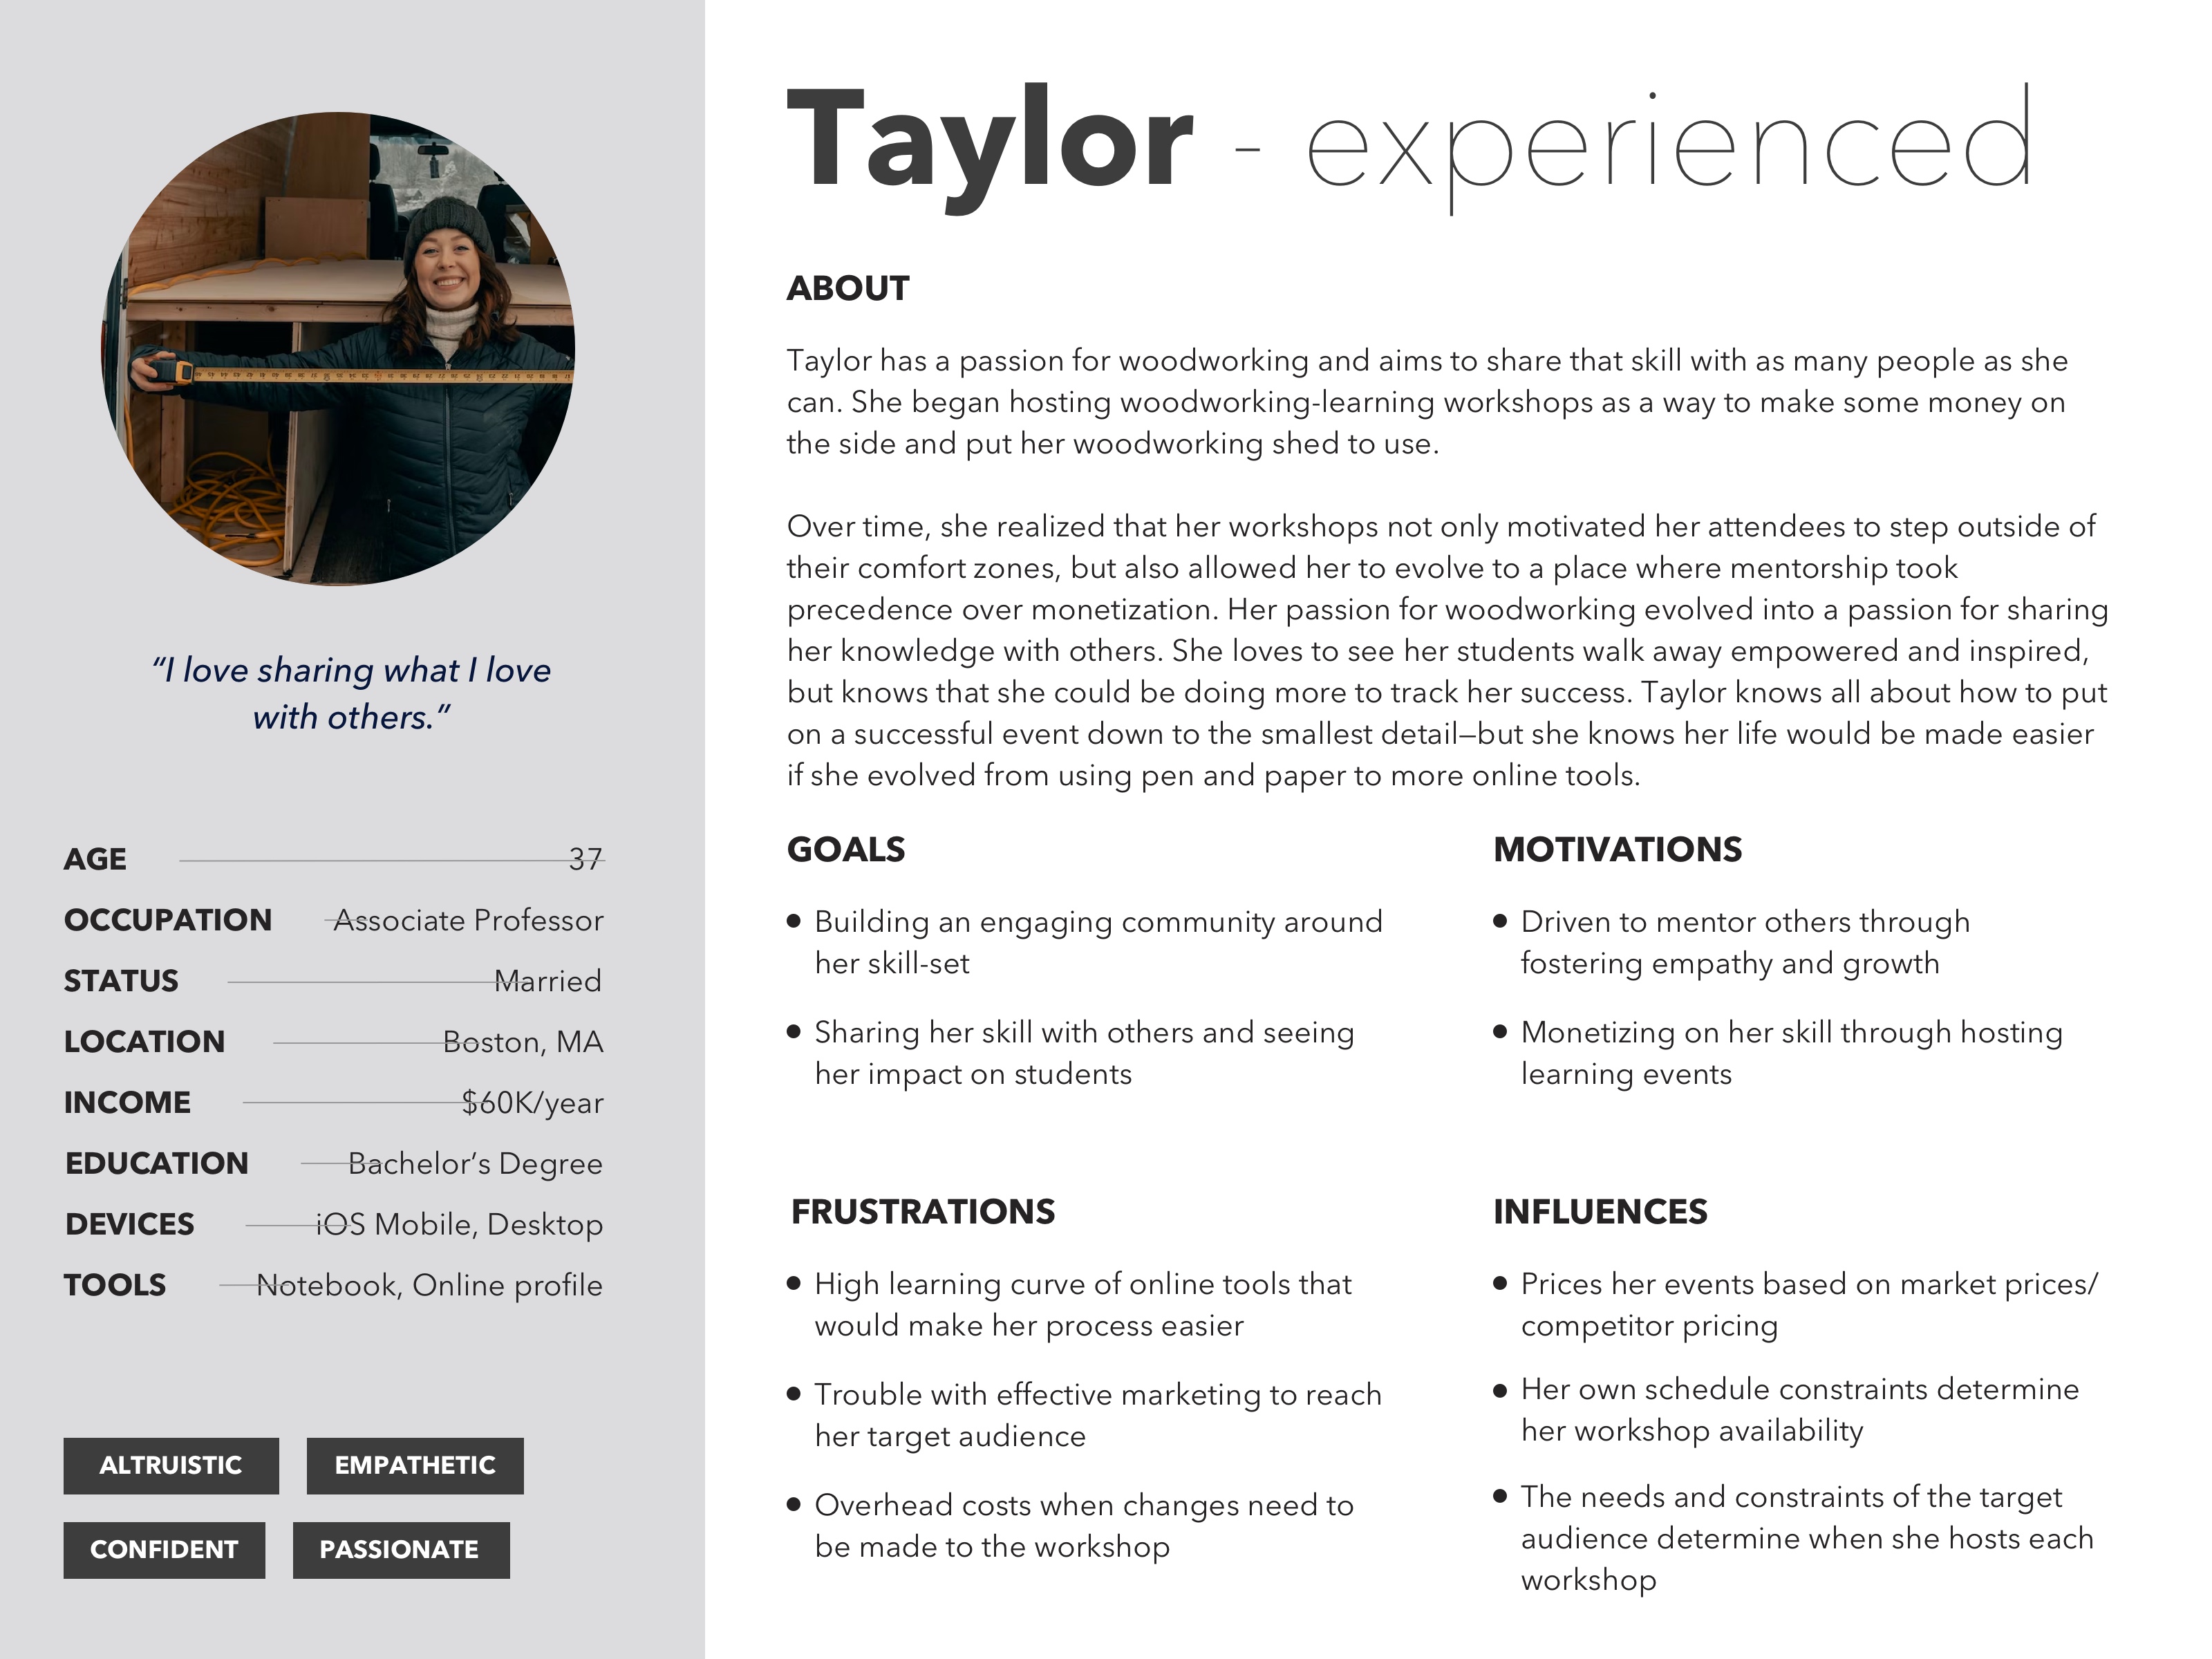 image of a persona of Taylor, the experienced host. The persona includes a summary, goals, motivations, frustrations, influences, and demographic information, as well as a headshot.